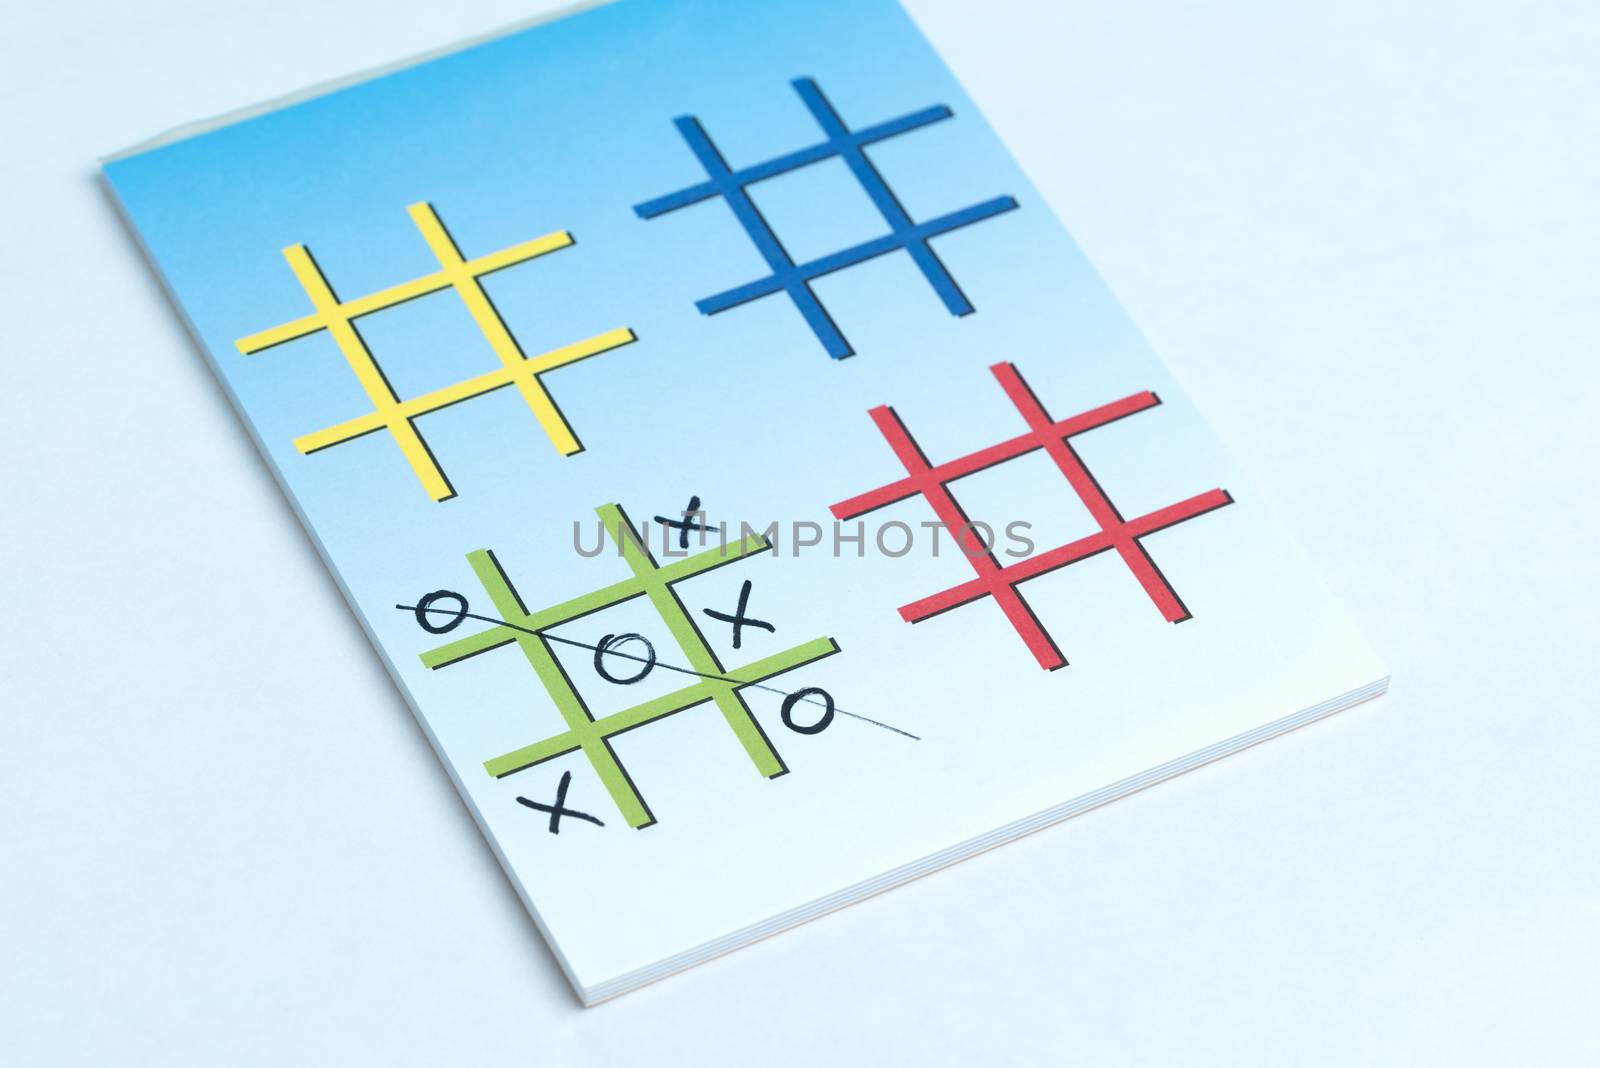 A close up of a game of Xs and Os on a note pad with colorful grids made for playing.